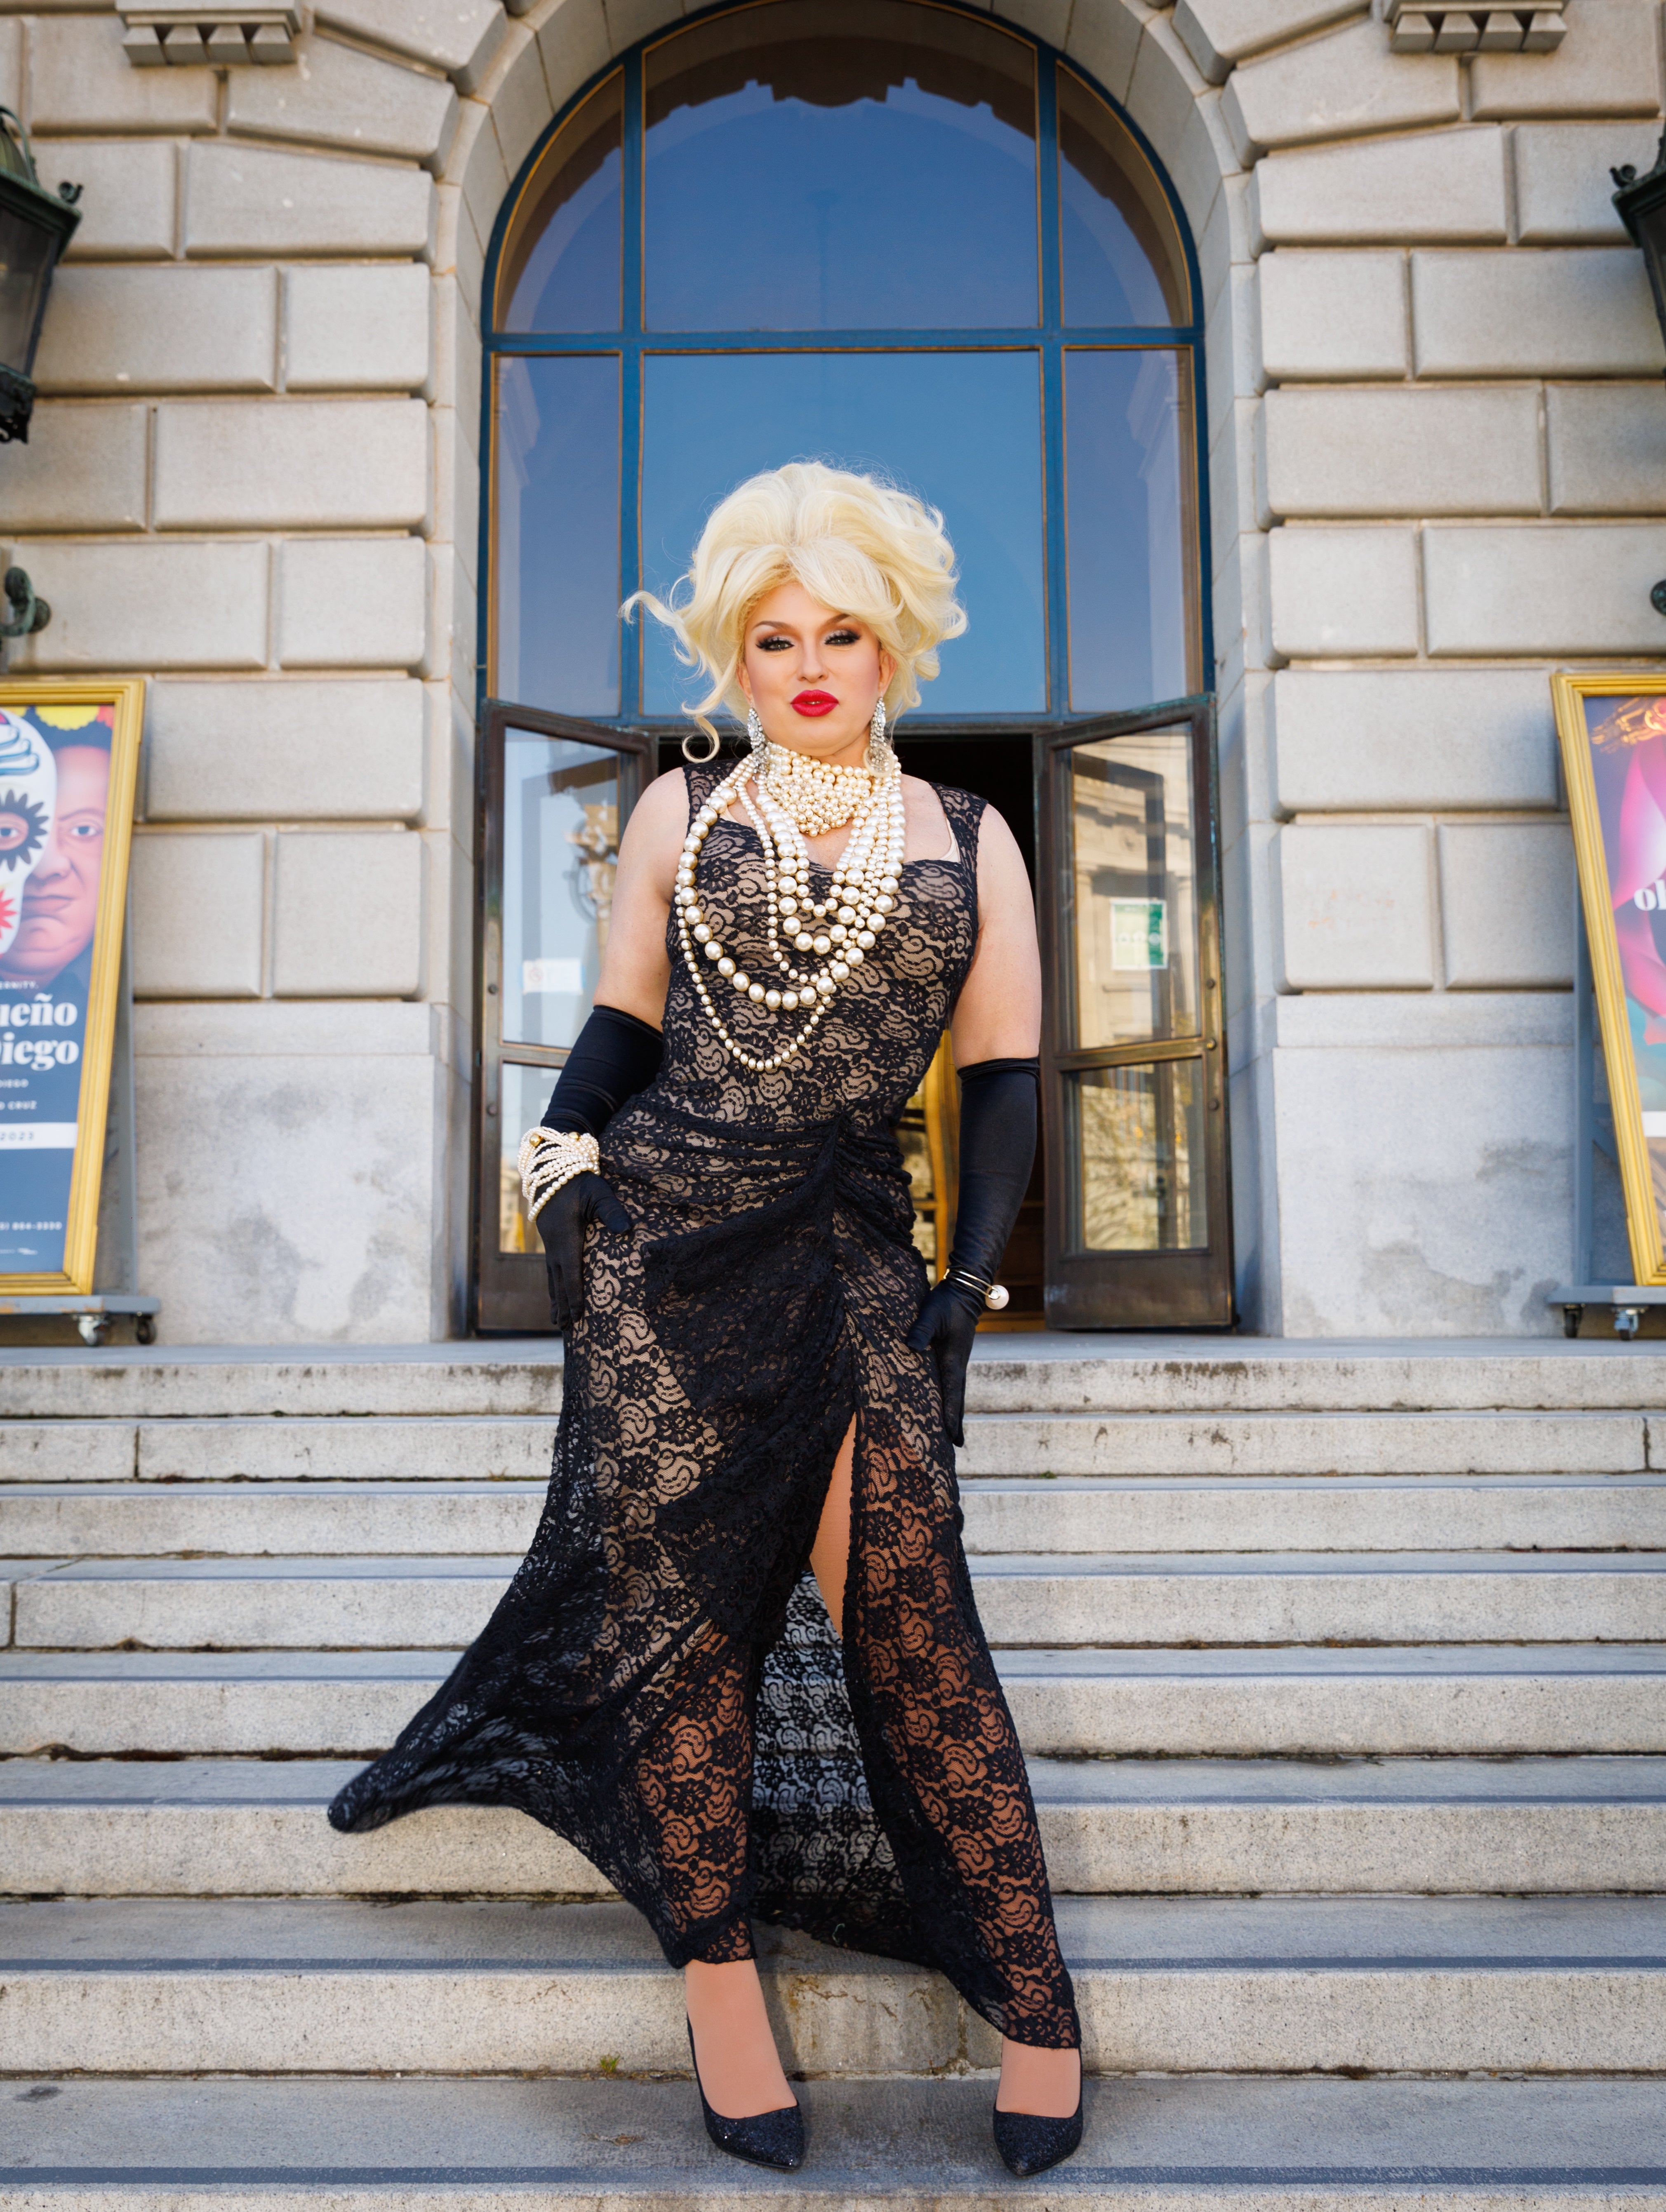 Performer D’Arcy Drollinger is America’s first Drag Laureate